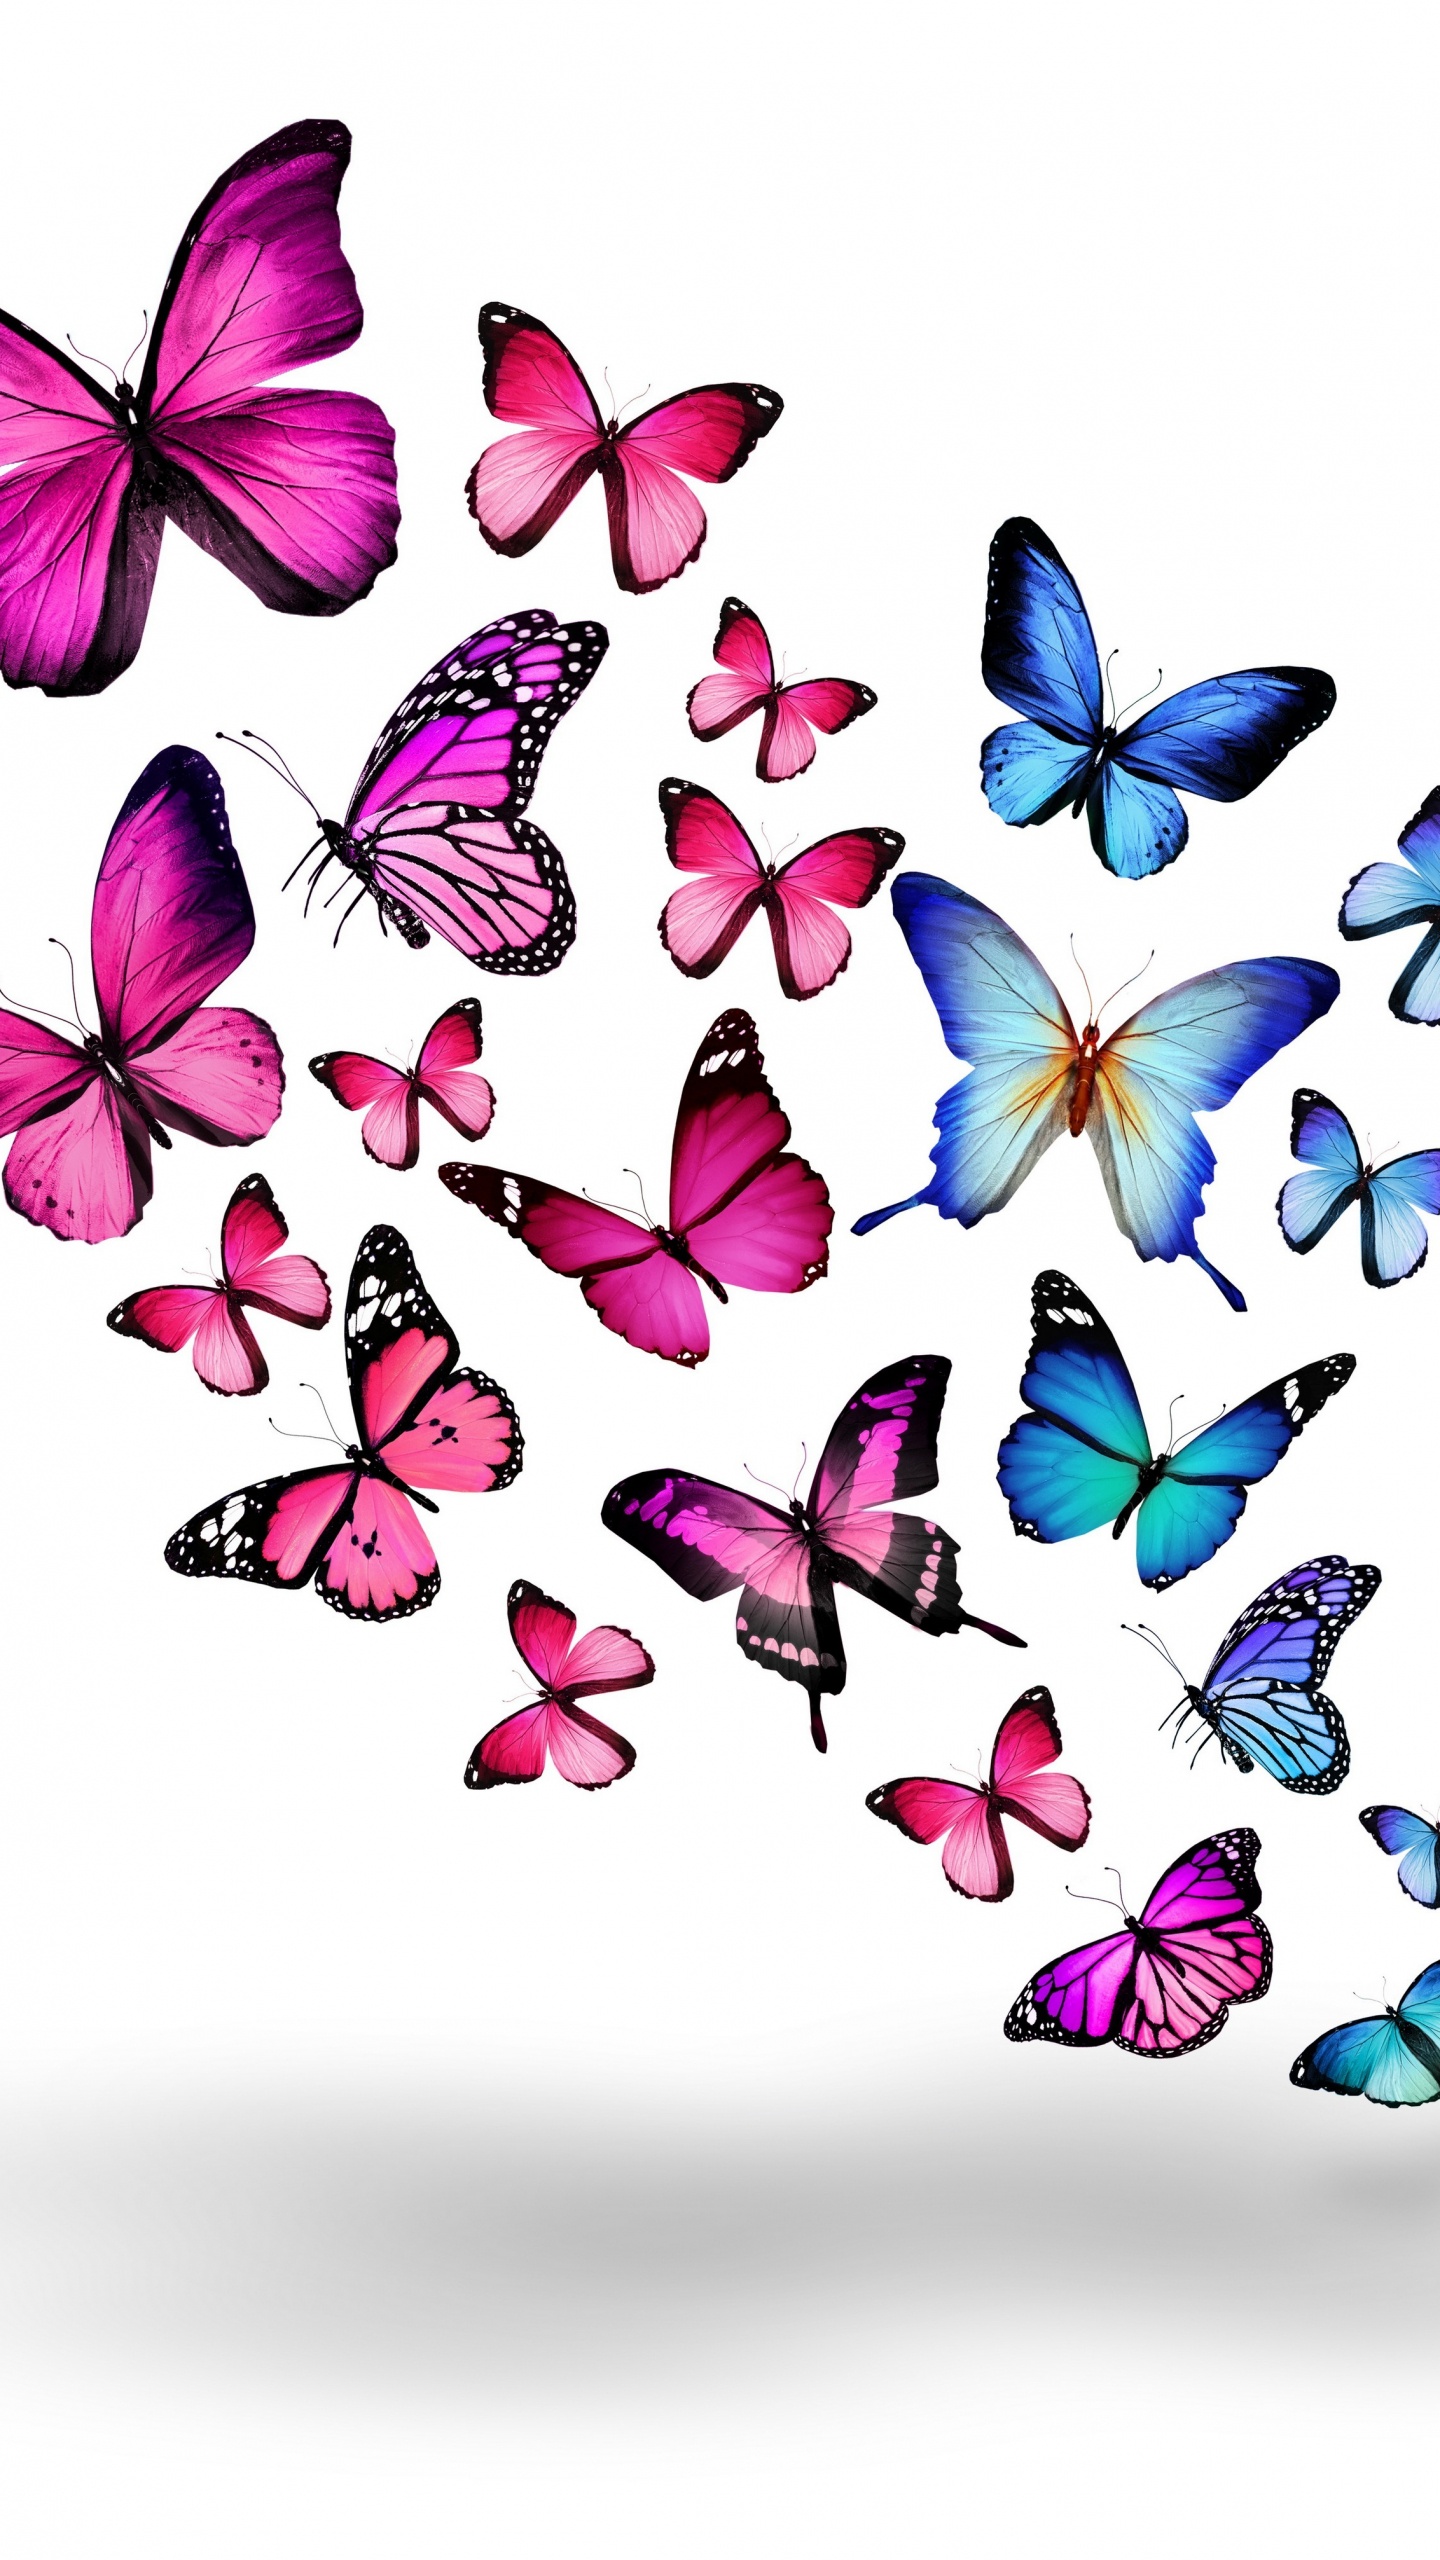 Blue and Purple Butterflies on White Background. Wallpaper in 1440x2560 Resolution